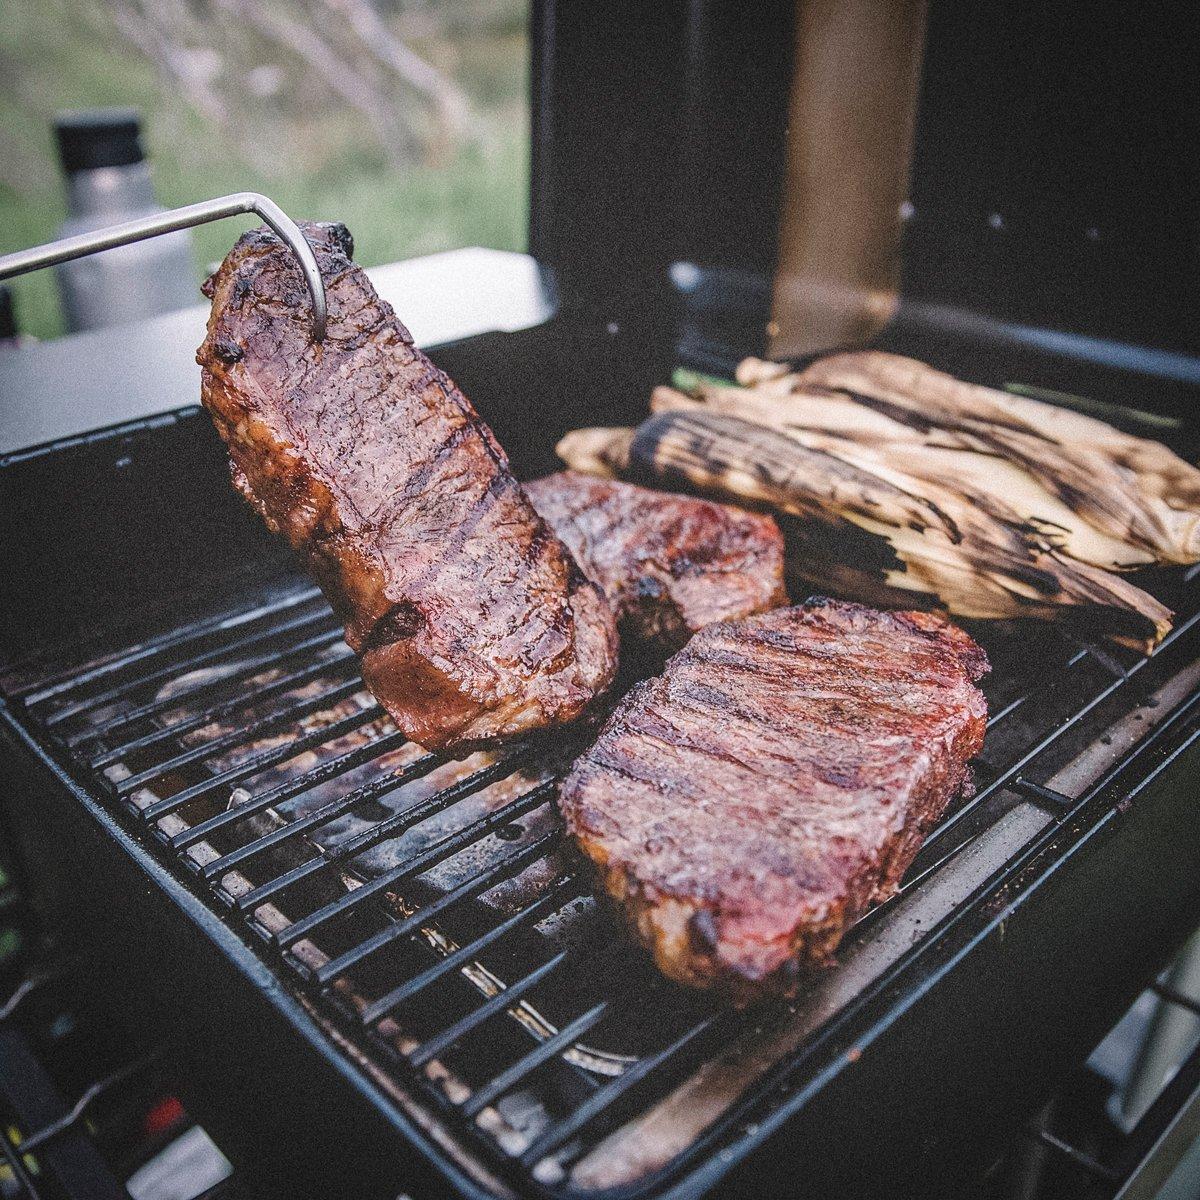 The perfect hunt camp meal. (Ranger Lifestyle photo)